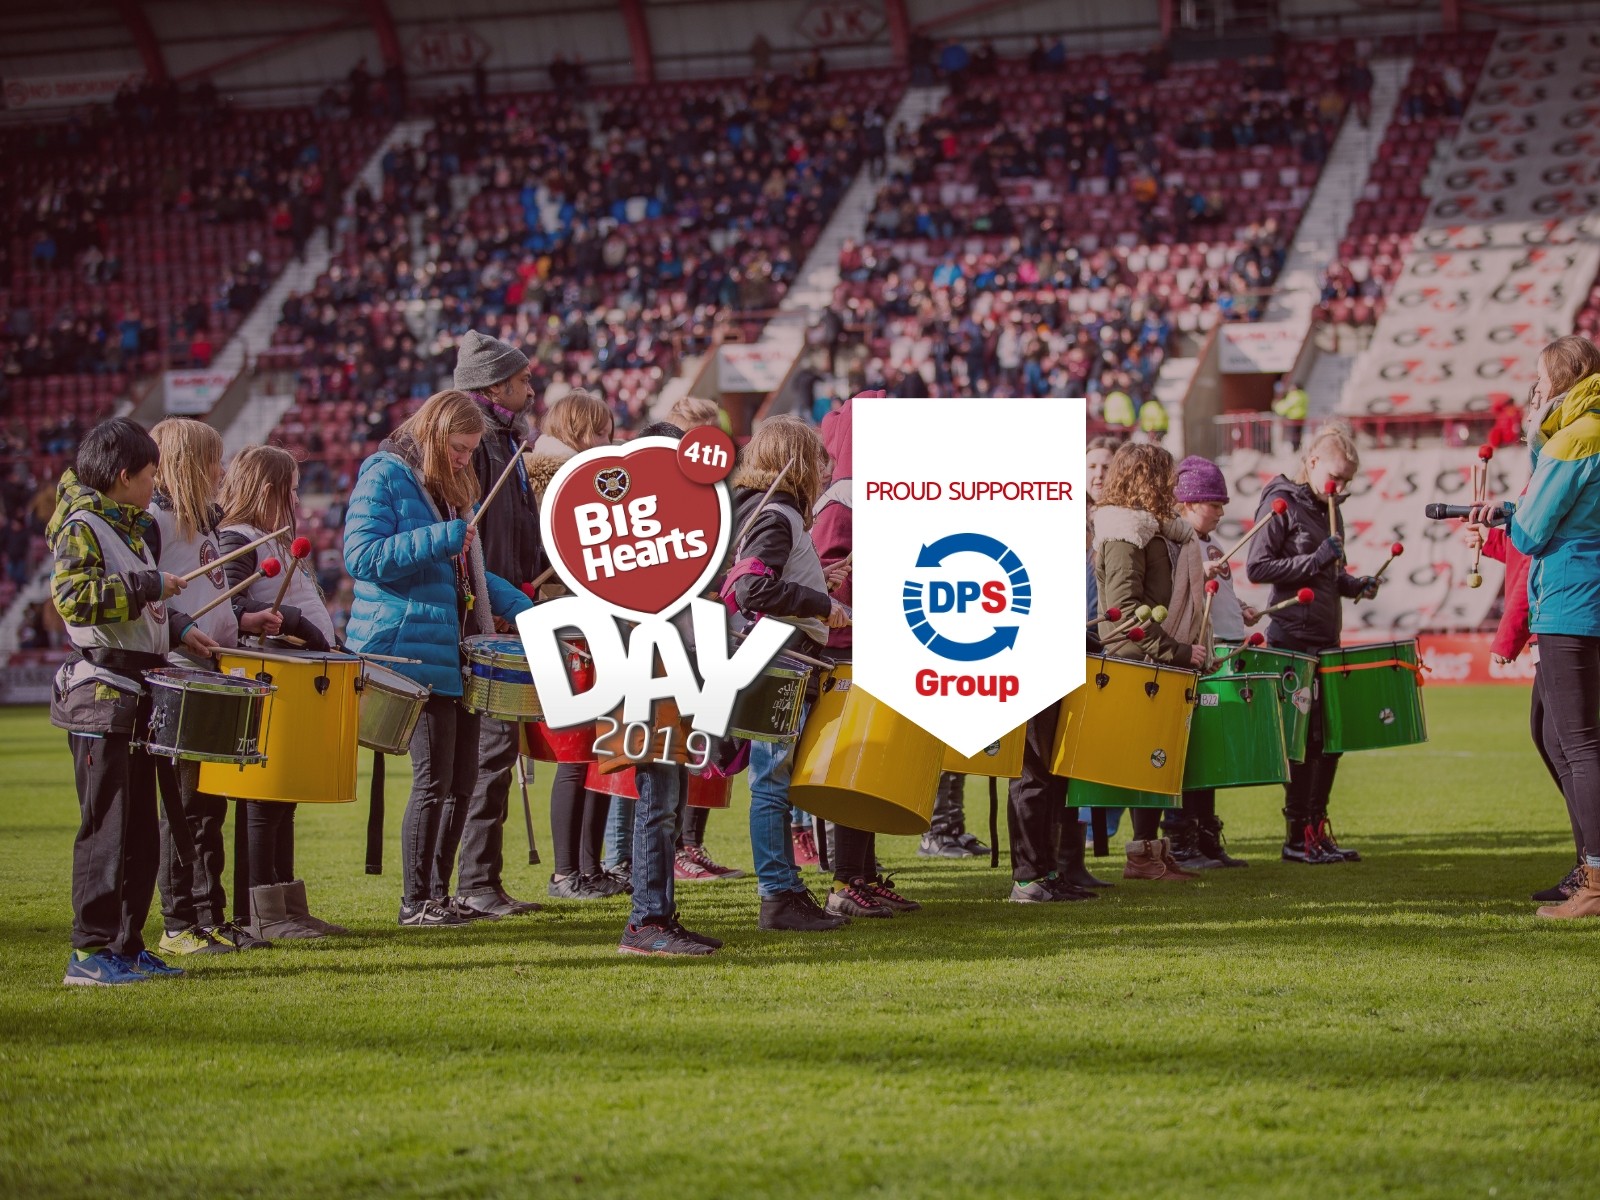  » DPS Group – proud supporter of #BigHeartsDay 2019!